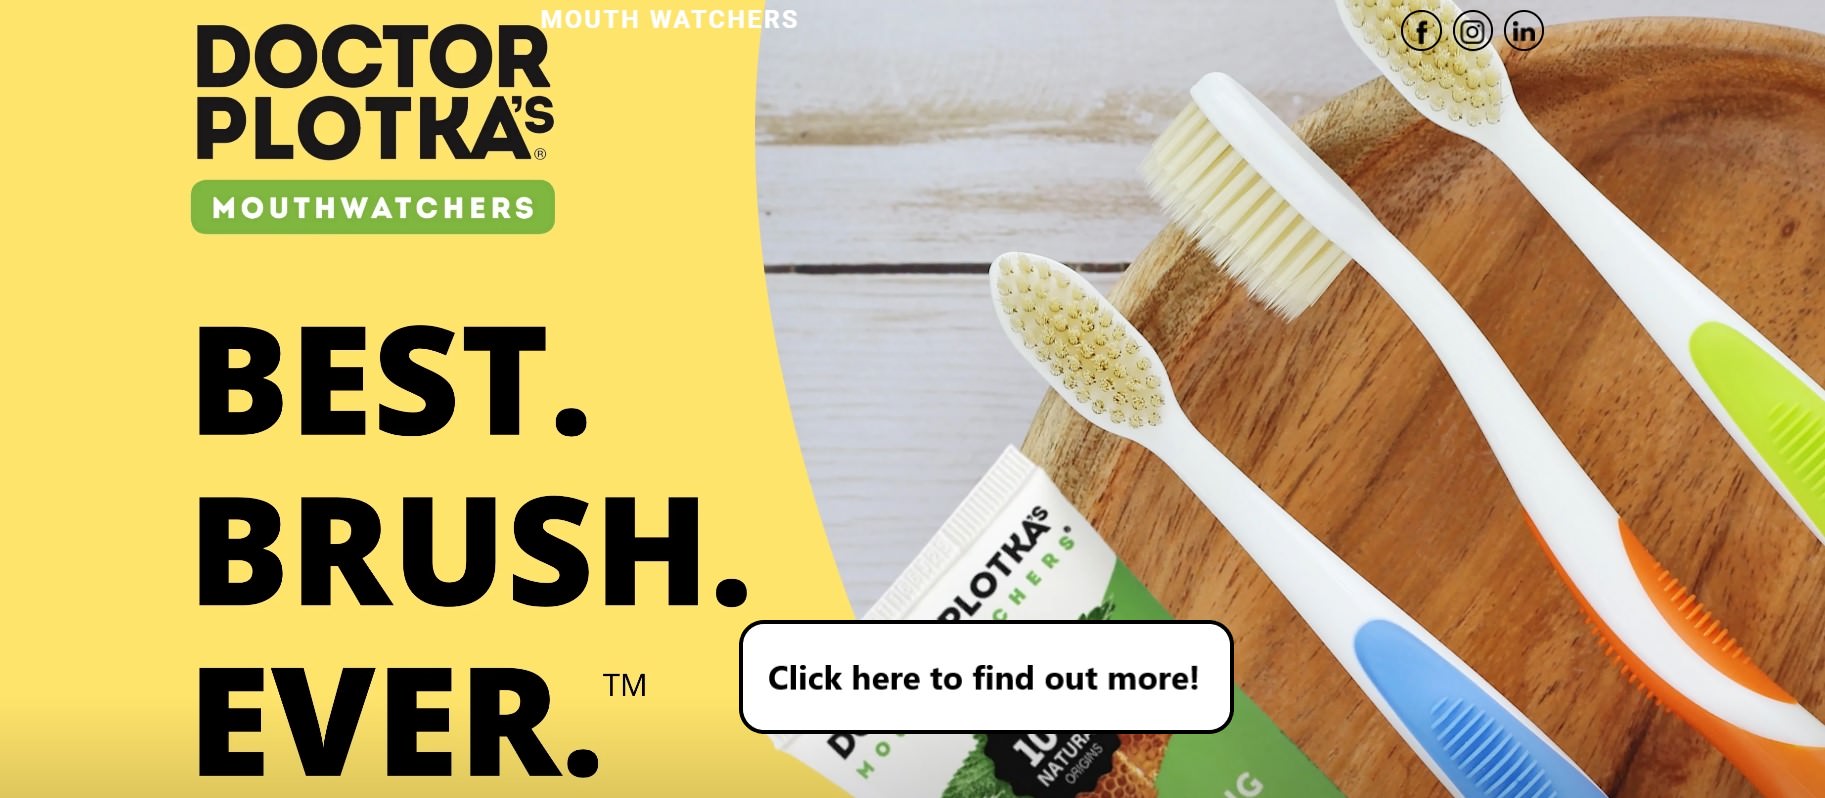 Mouthwatchers toothbrush ad